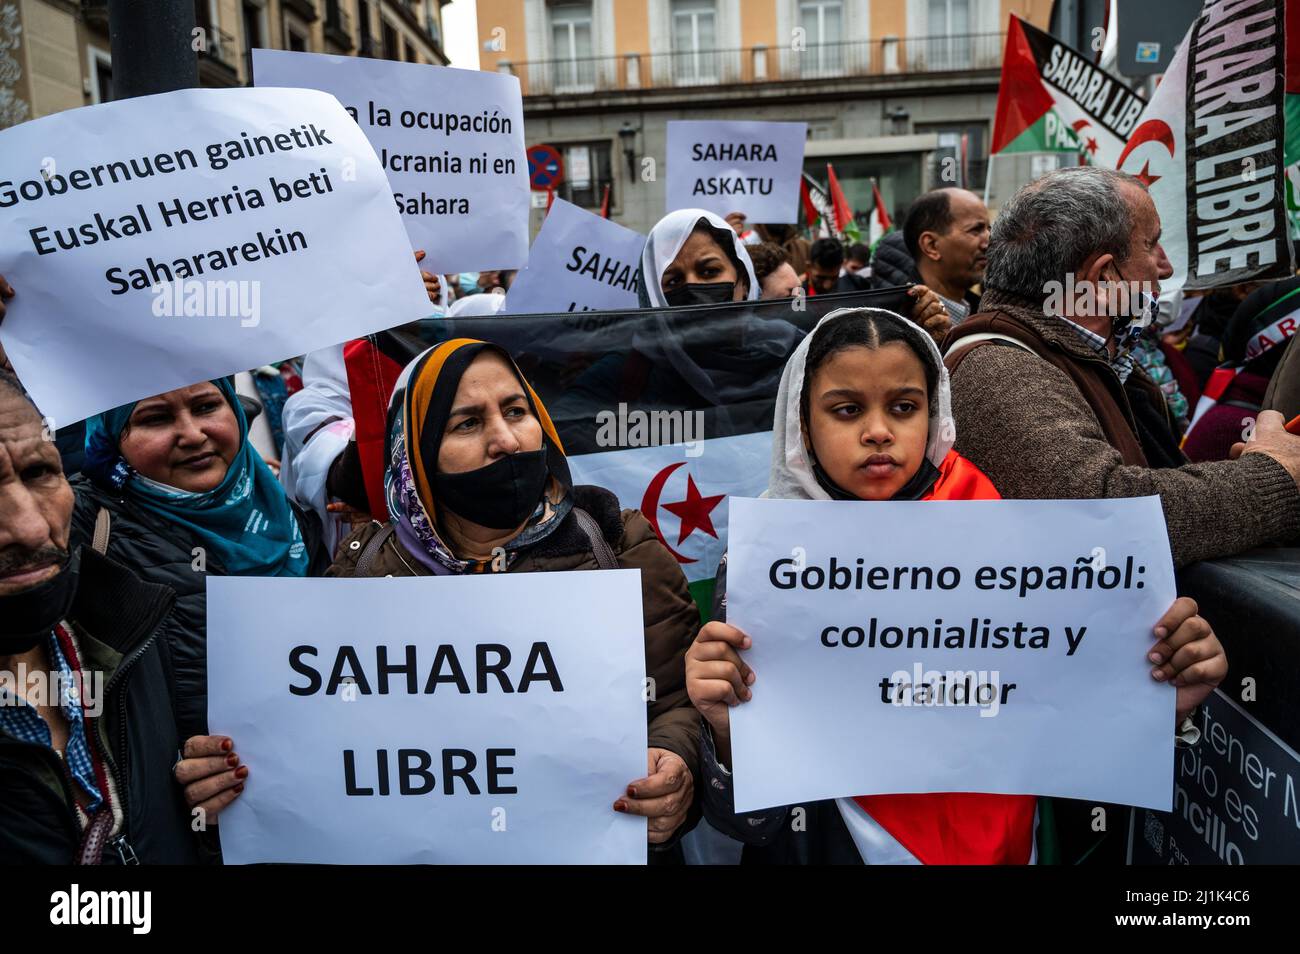 Madrid, Spain. 26th Mar, 2022. Saharawi community and supporters are seen with placards demanding freedom for the Western Sahara during a demonstration in front of the Ministry of Foreign Affairs. Thousands have gathered to protest against the Spanish government's support for Morocco's autonomy plan for Western Sahara, which grants a limited autonomy to Western Sahara. Pro-independence groups as well as Algeria oppose the proposal. Credit: Marcos del Mazo/Alamy Live News Stock Photo